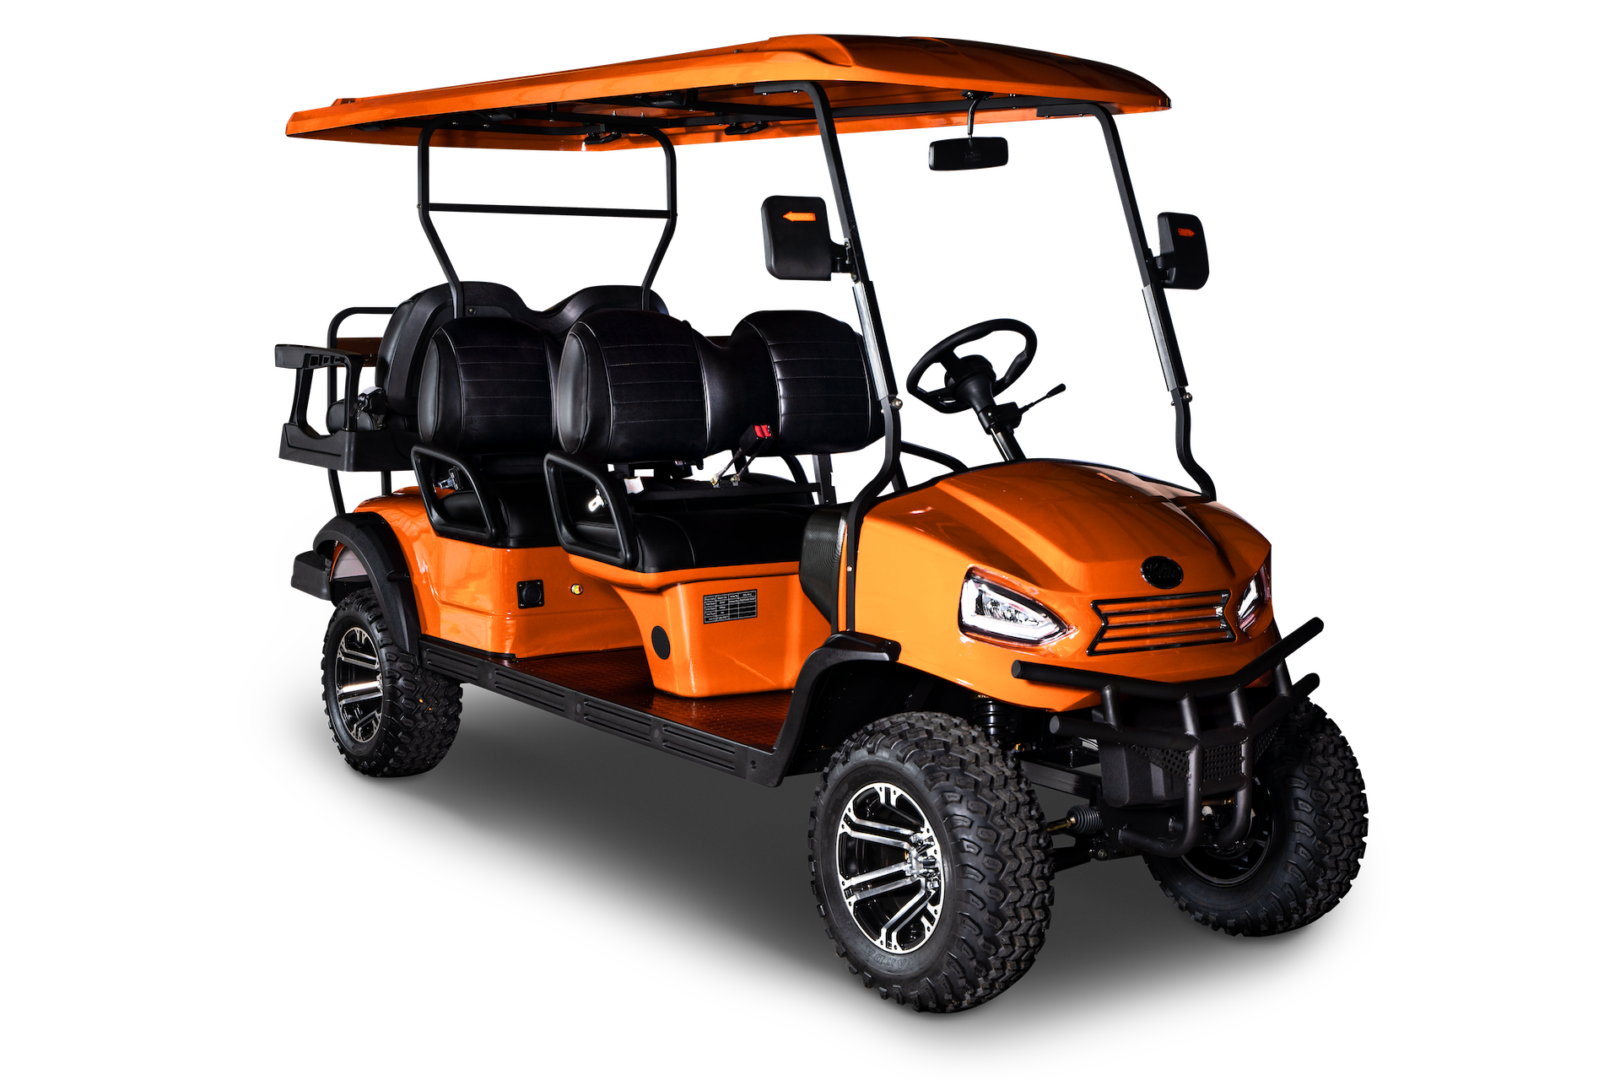 A golf cart with an orange top is shown.